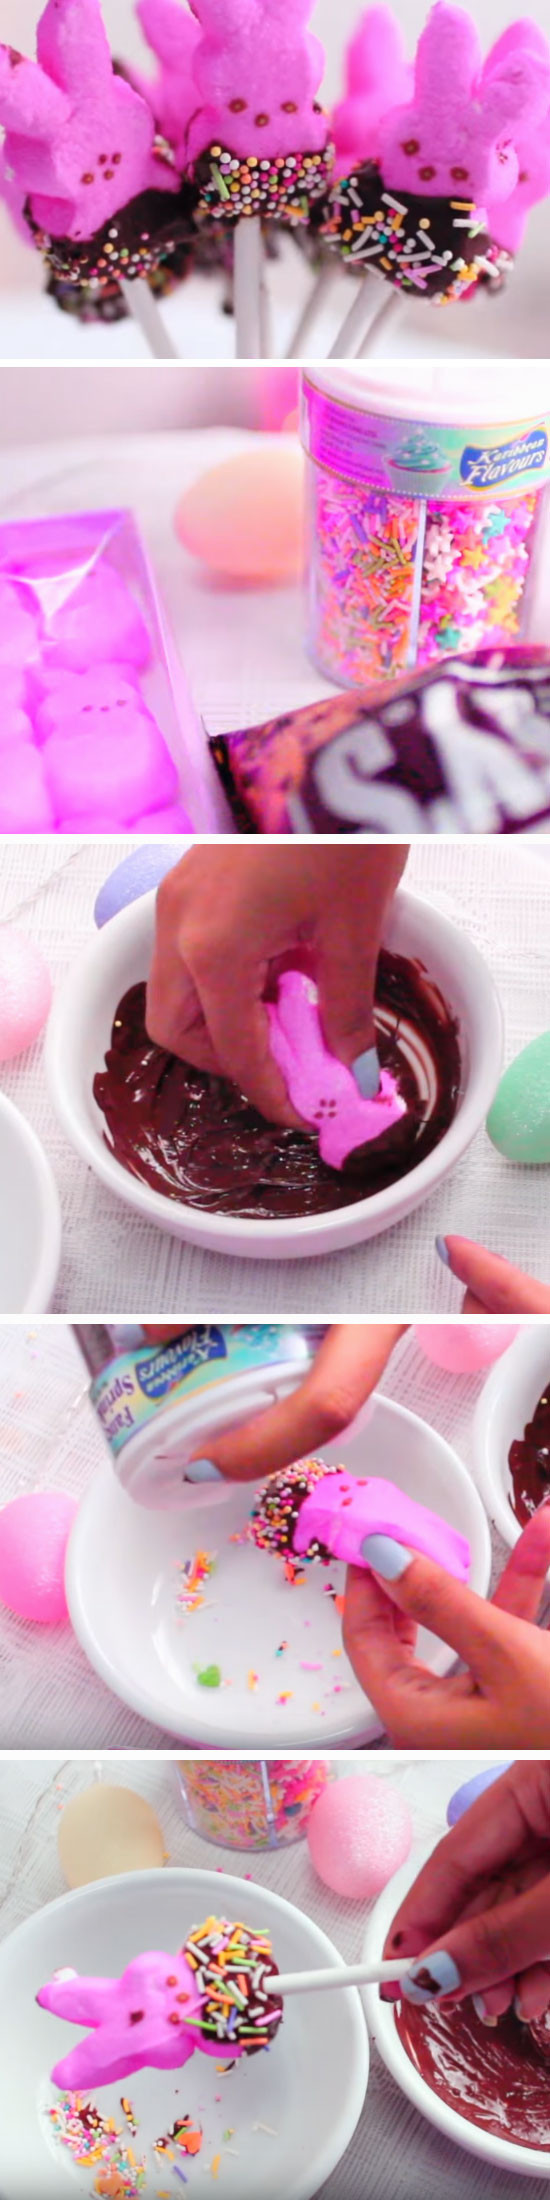 Easter Party Ideas For Teens
 21 DIY Easter Party Favor Ideas for Teens